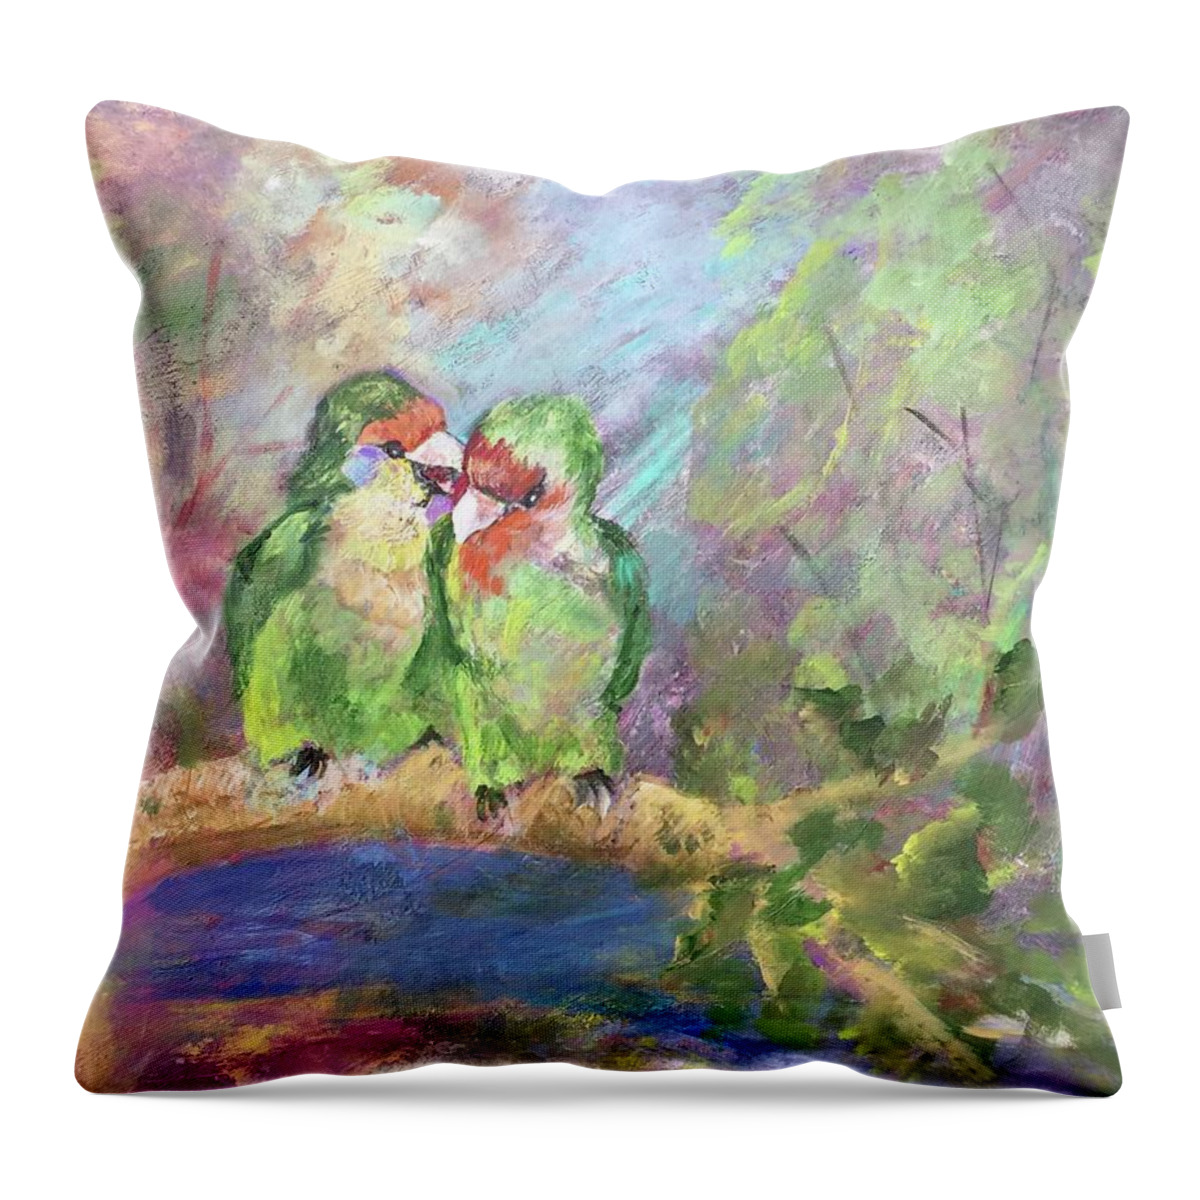 Two Little Lovebirds In A Forest. Throw Pillow featuring the painting Love Birds by Charme Curtin